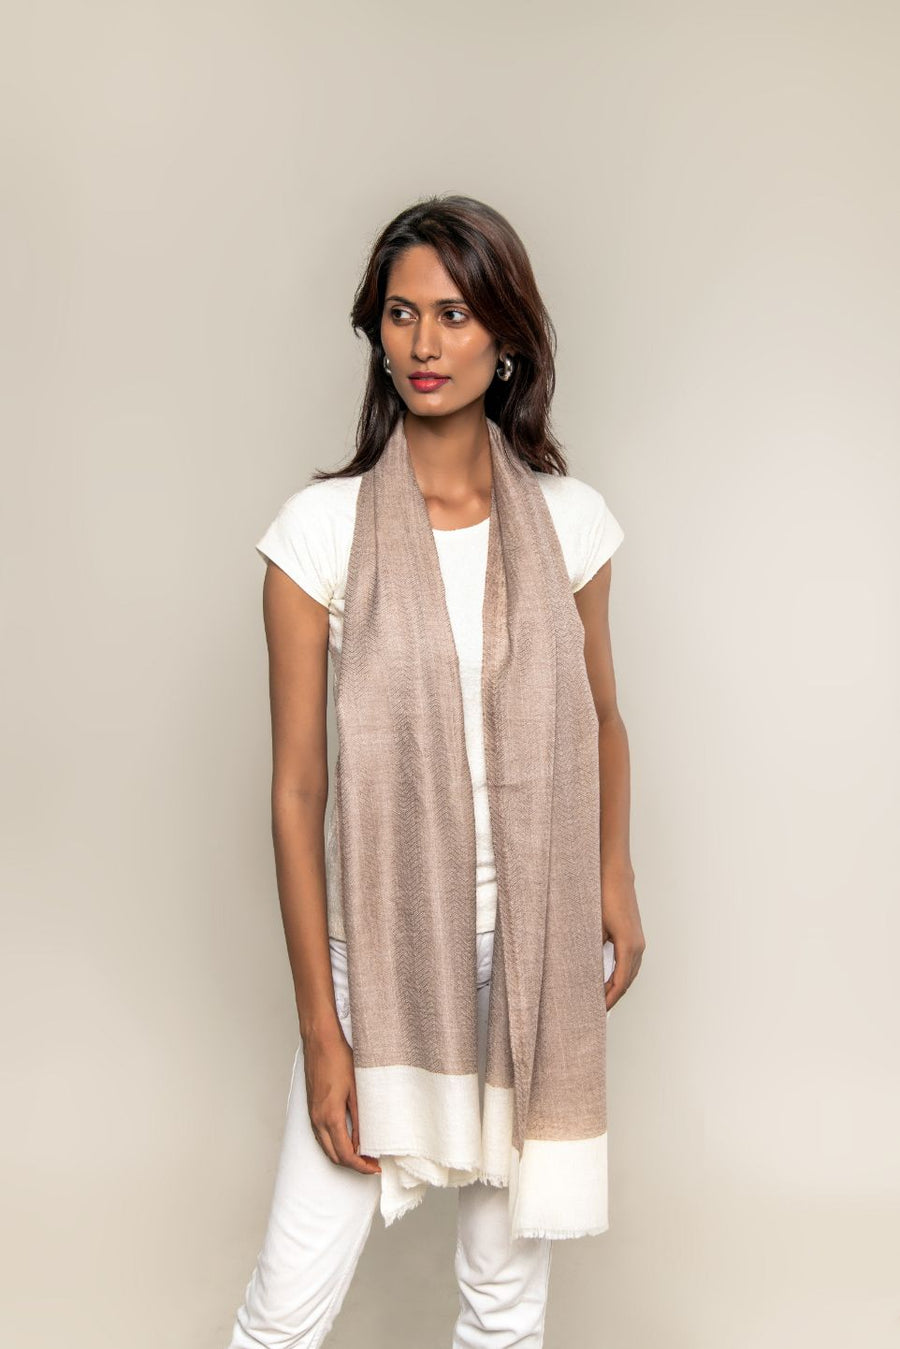 Premium Quality Pashmina Stoles for a Luxurious Look